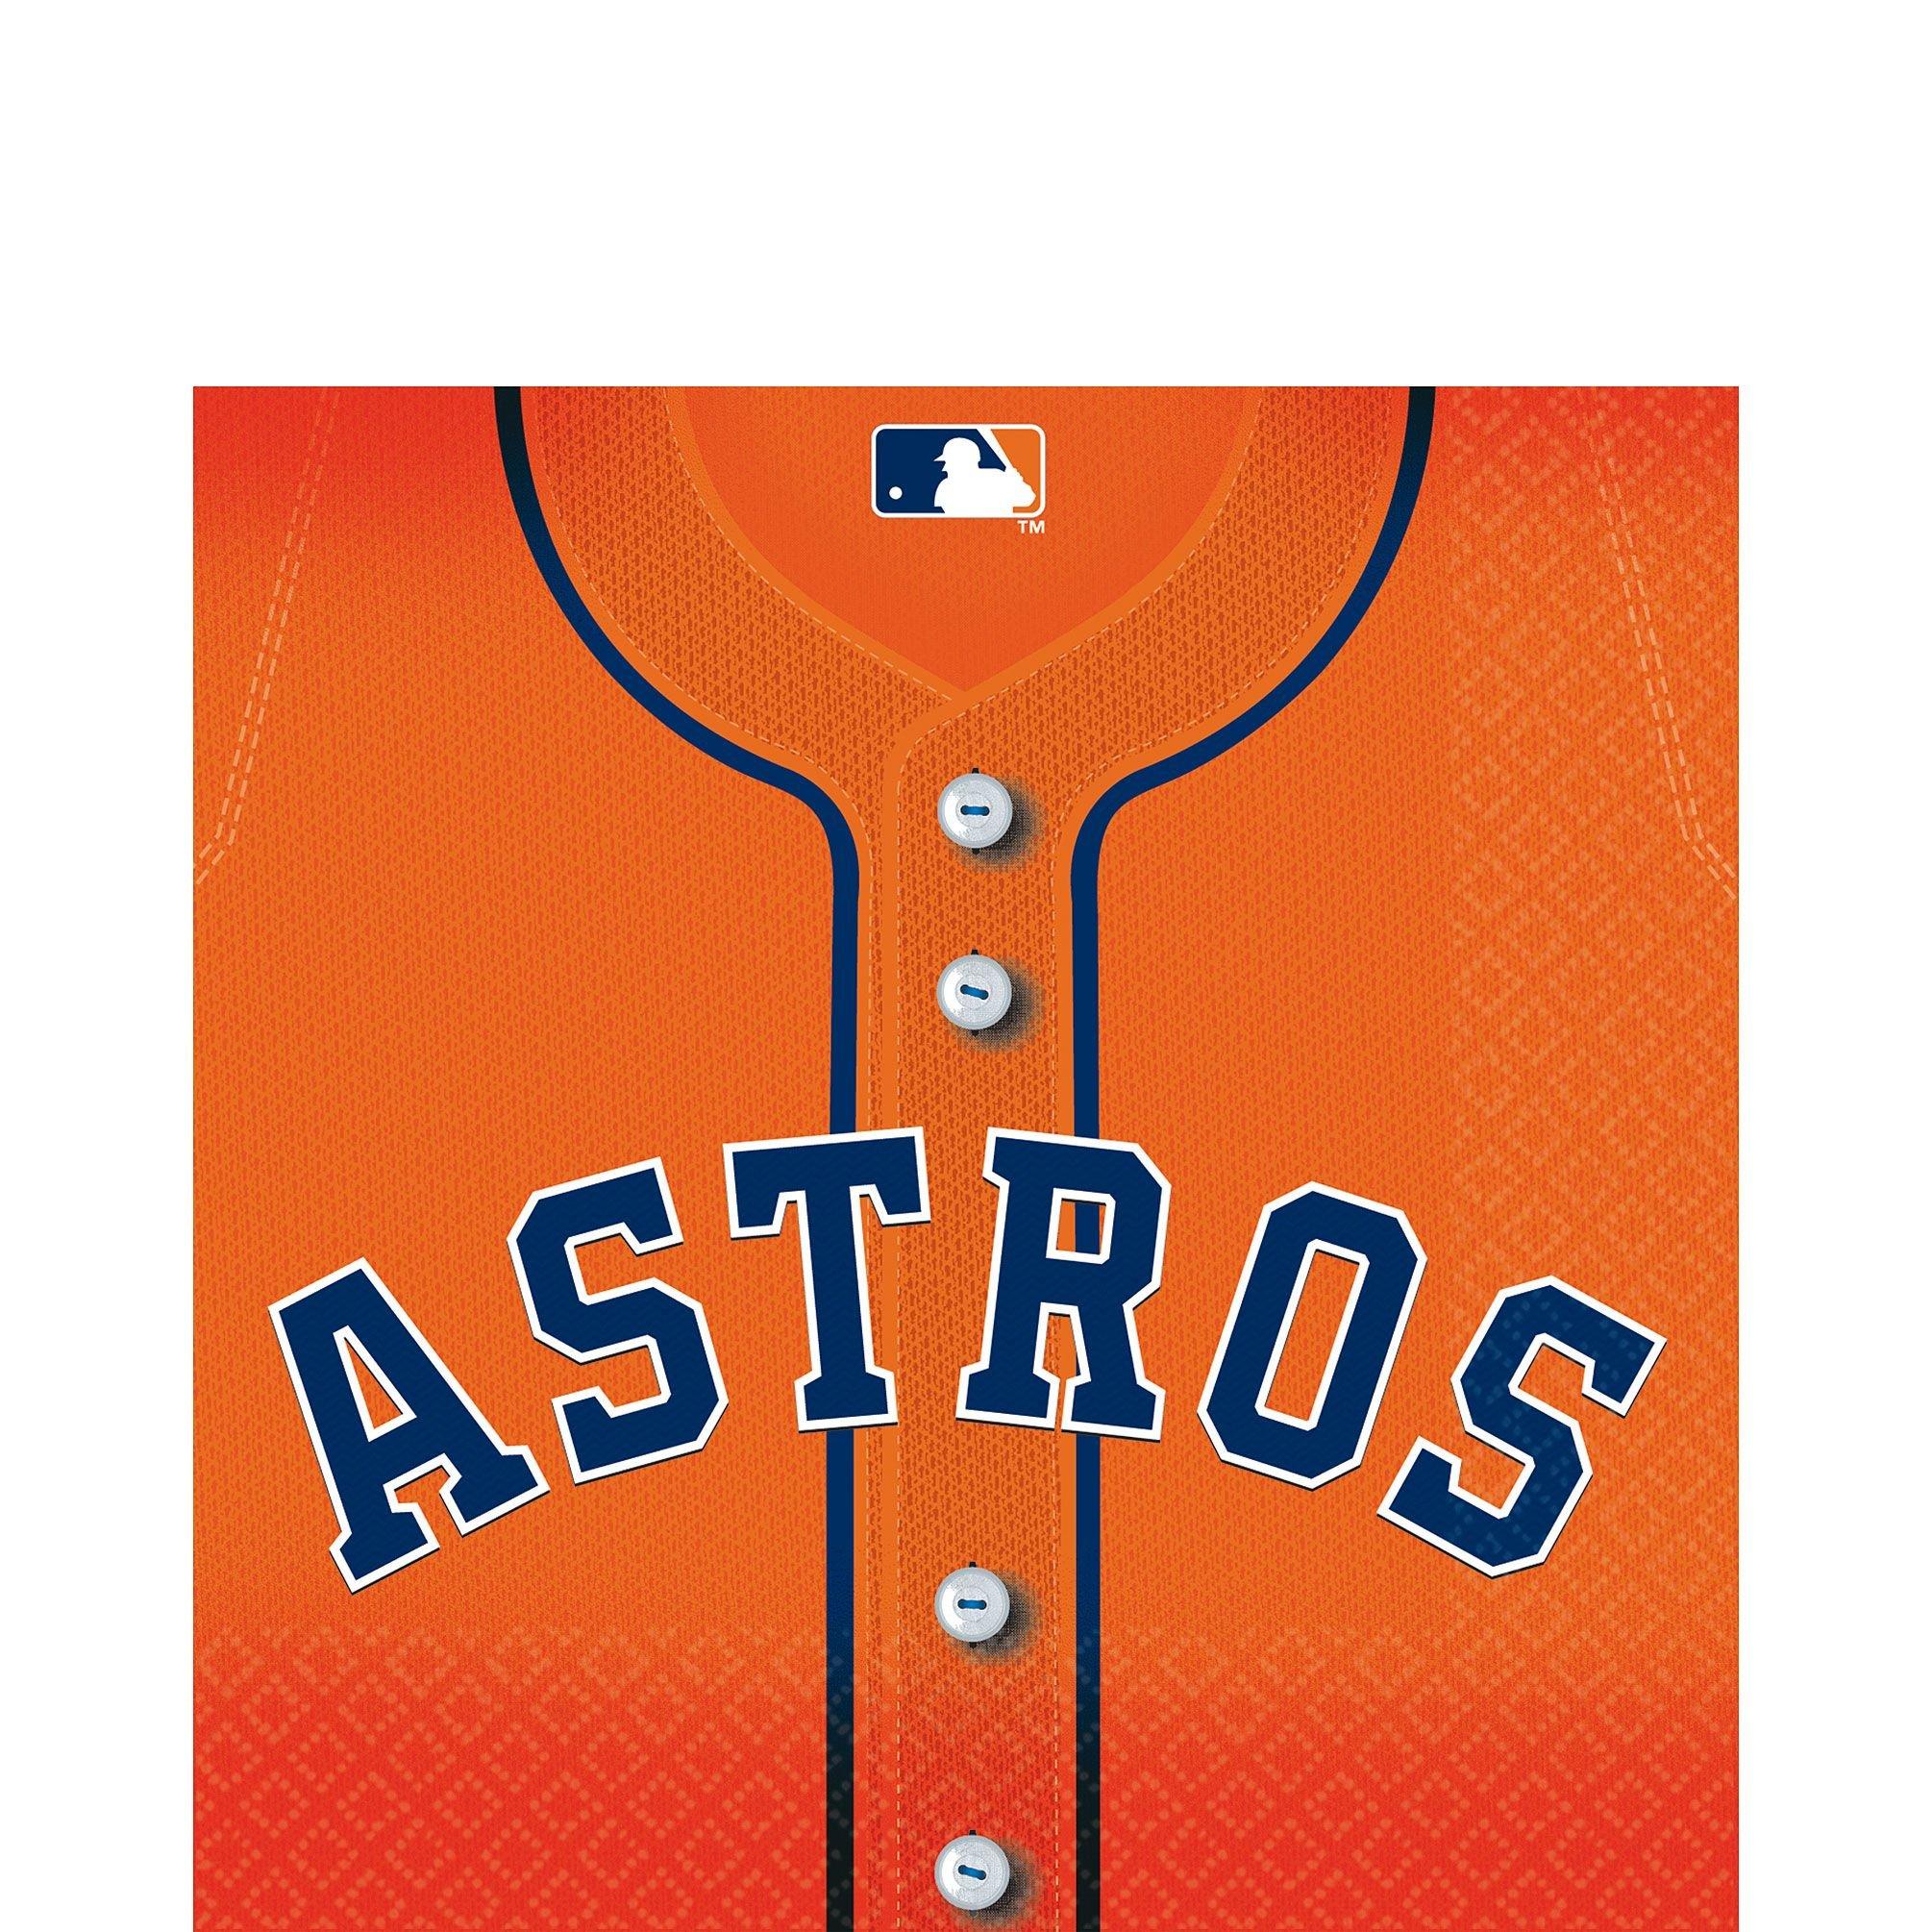 Houston Astro's baseball outfit  Gameday outfit, Baseball outfit